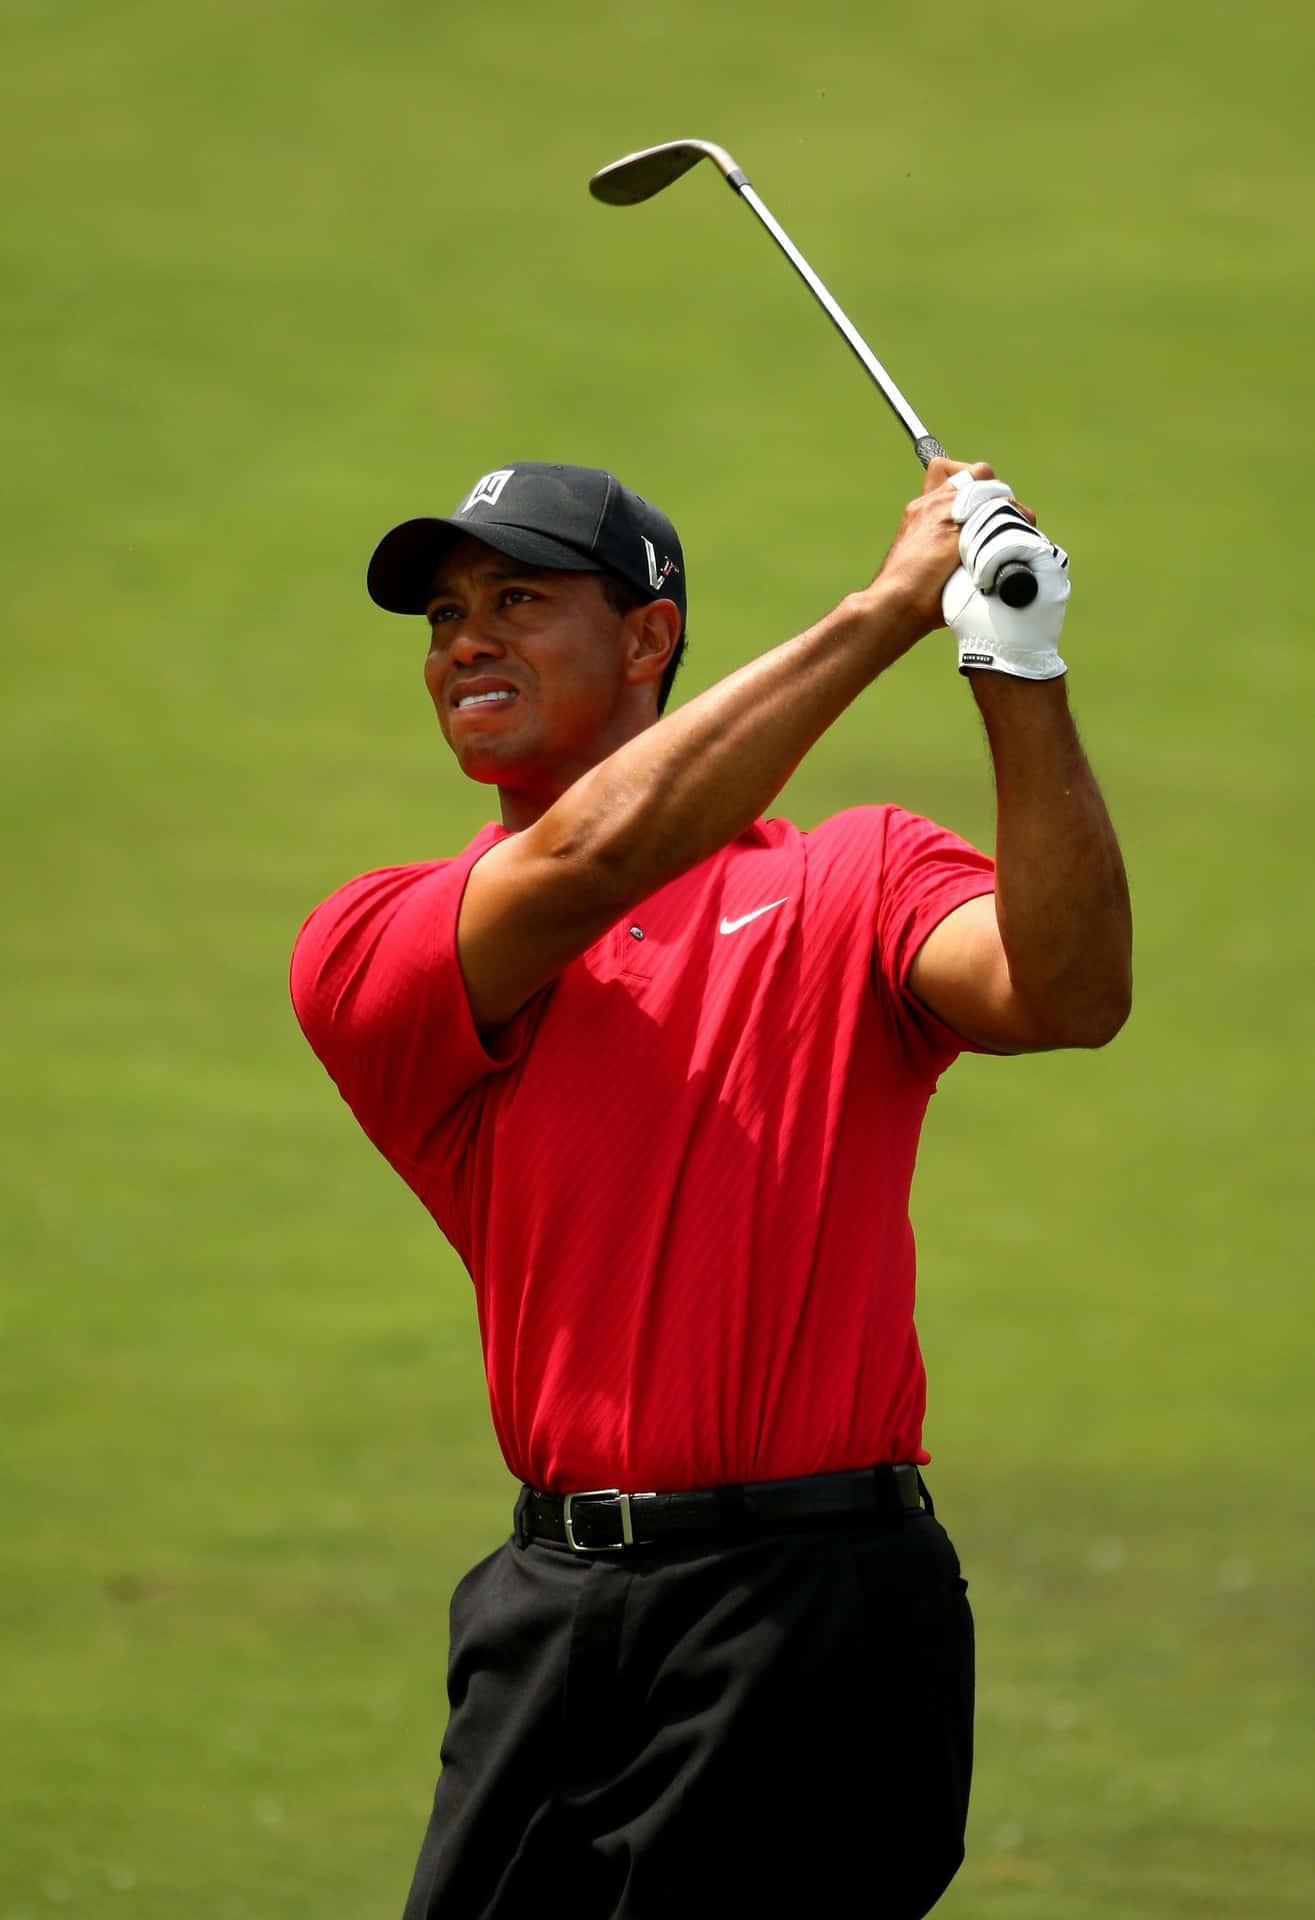 Teary-eyed Tiger Woods Iphone Wallpaper